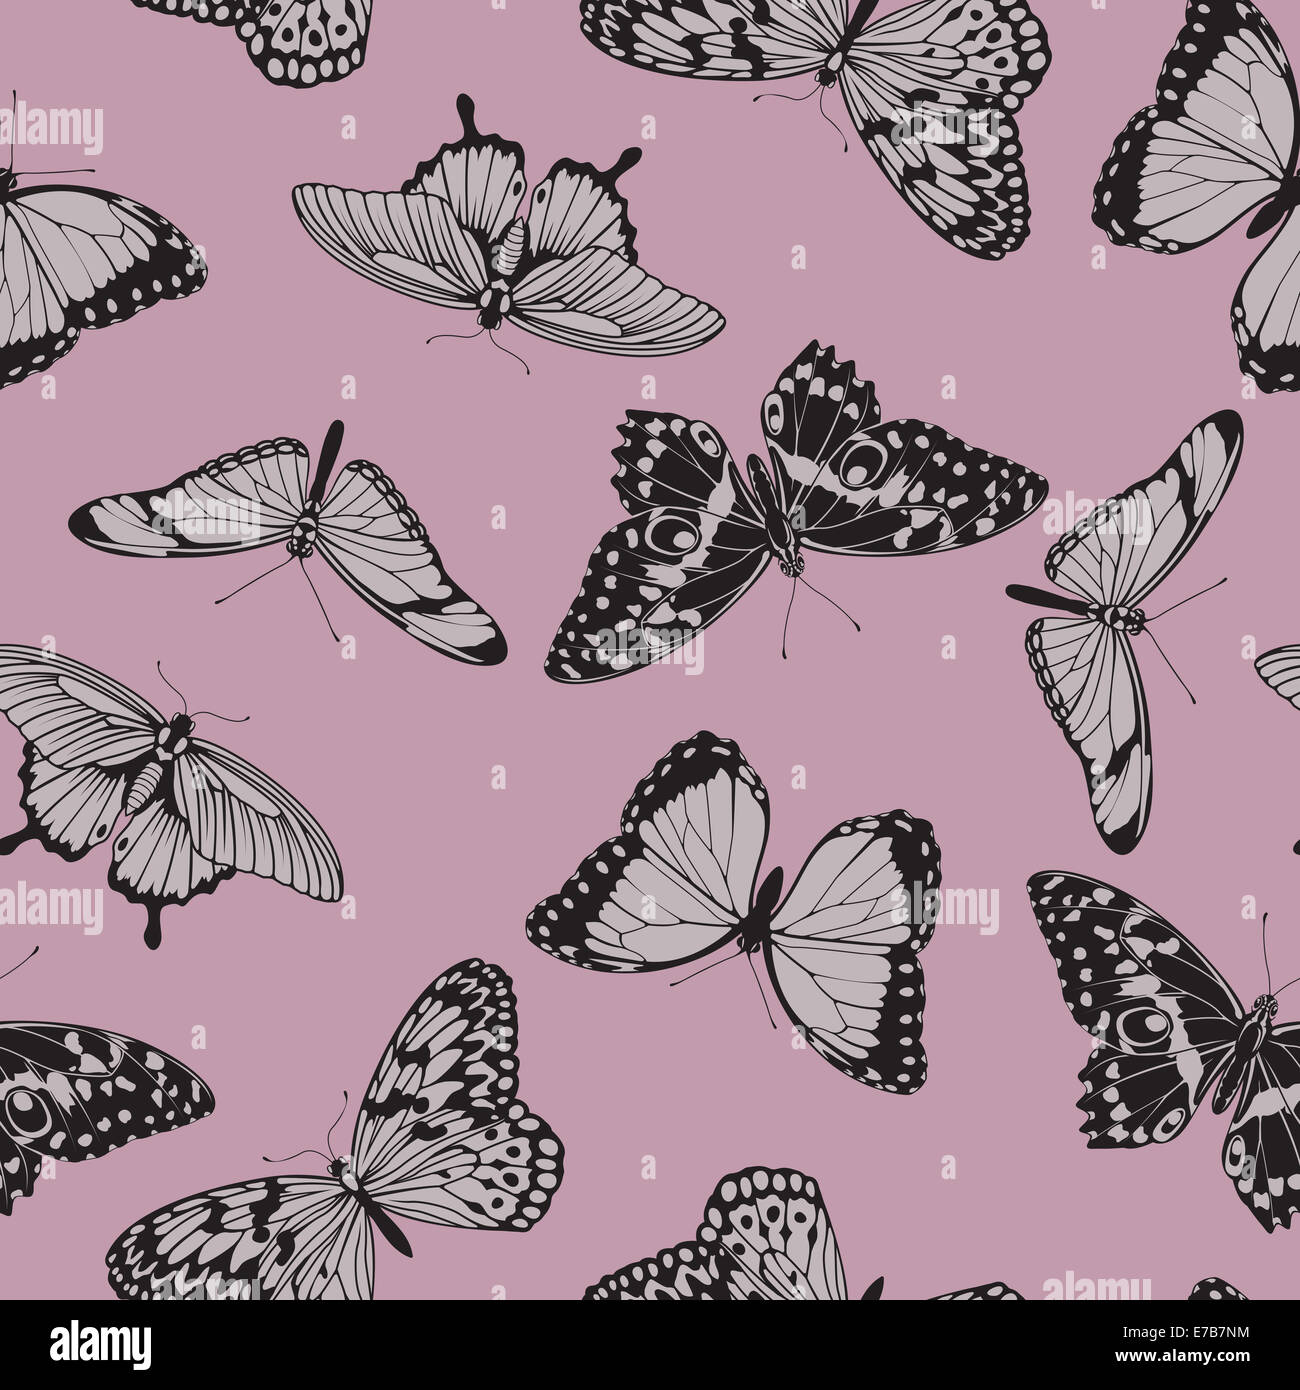 Butterfly seamless vintage background pattern illustration in muted pink tones Stock Photo